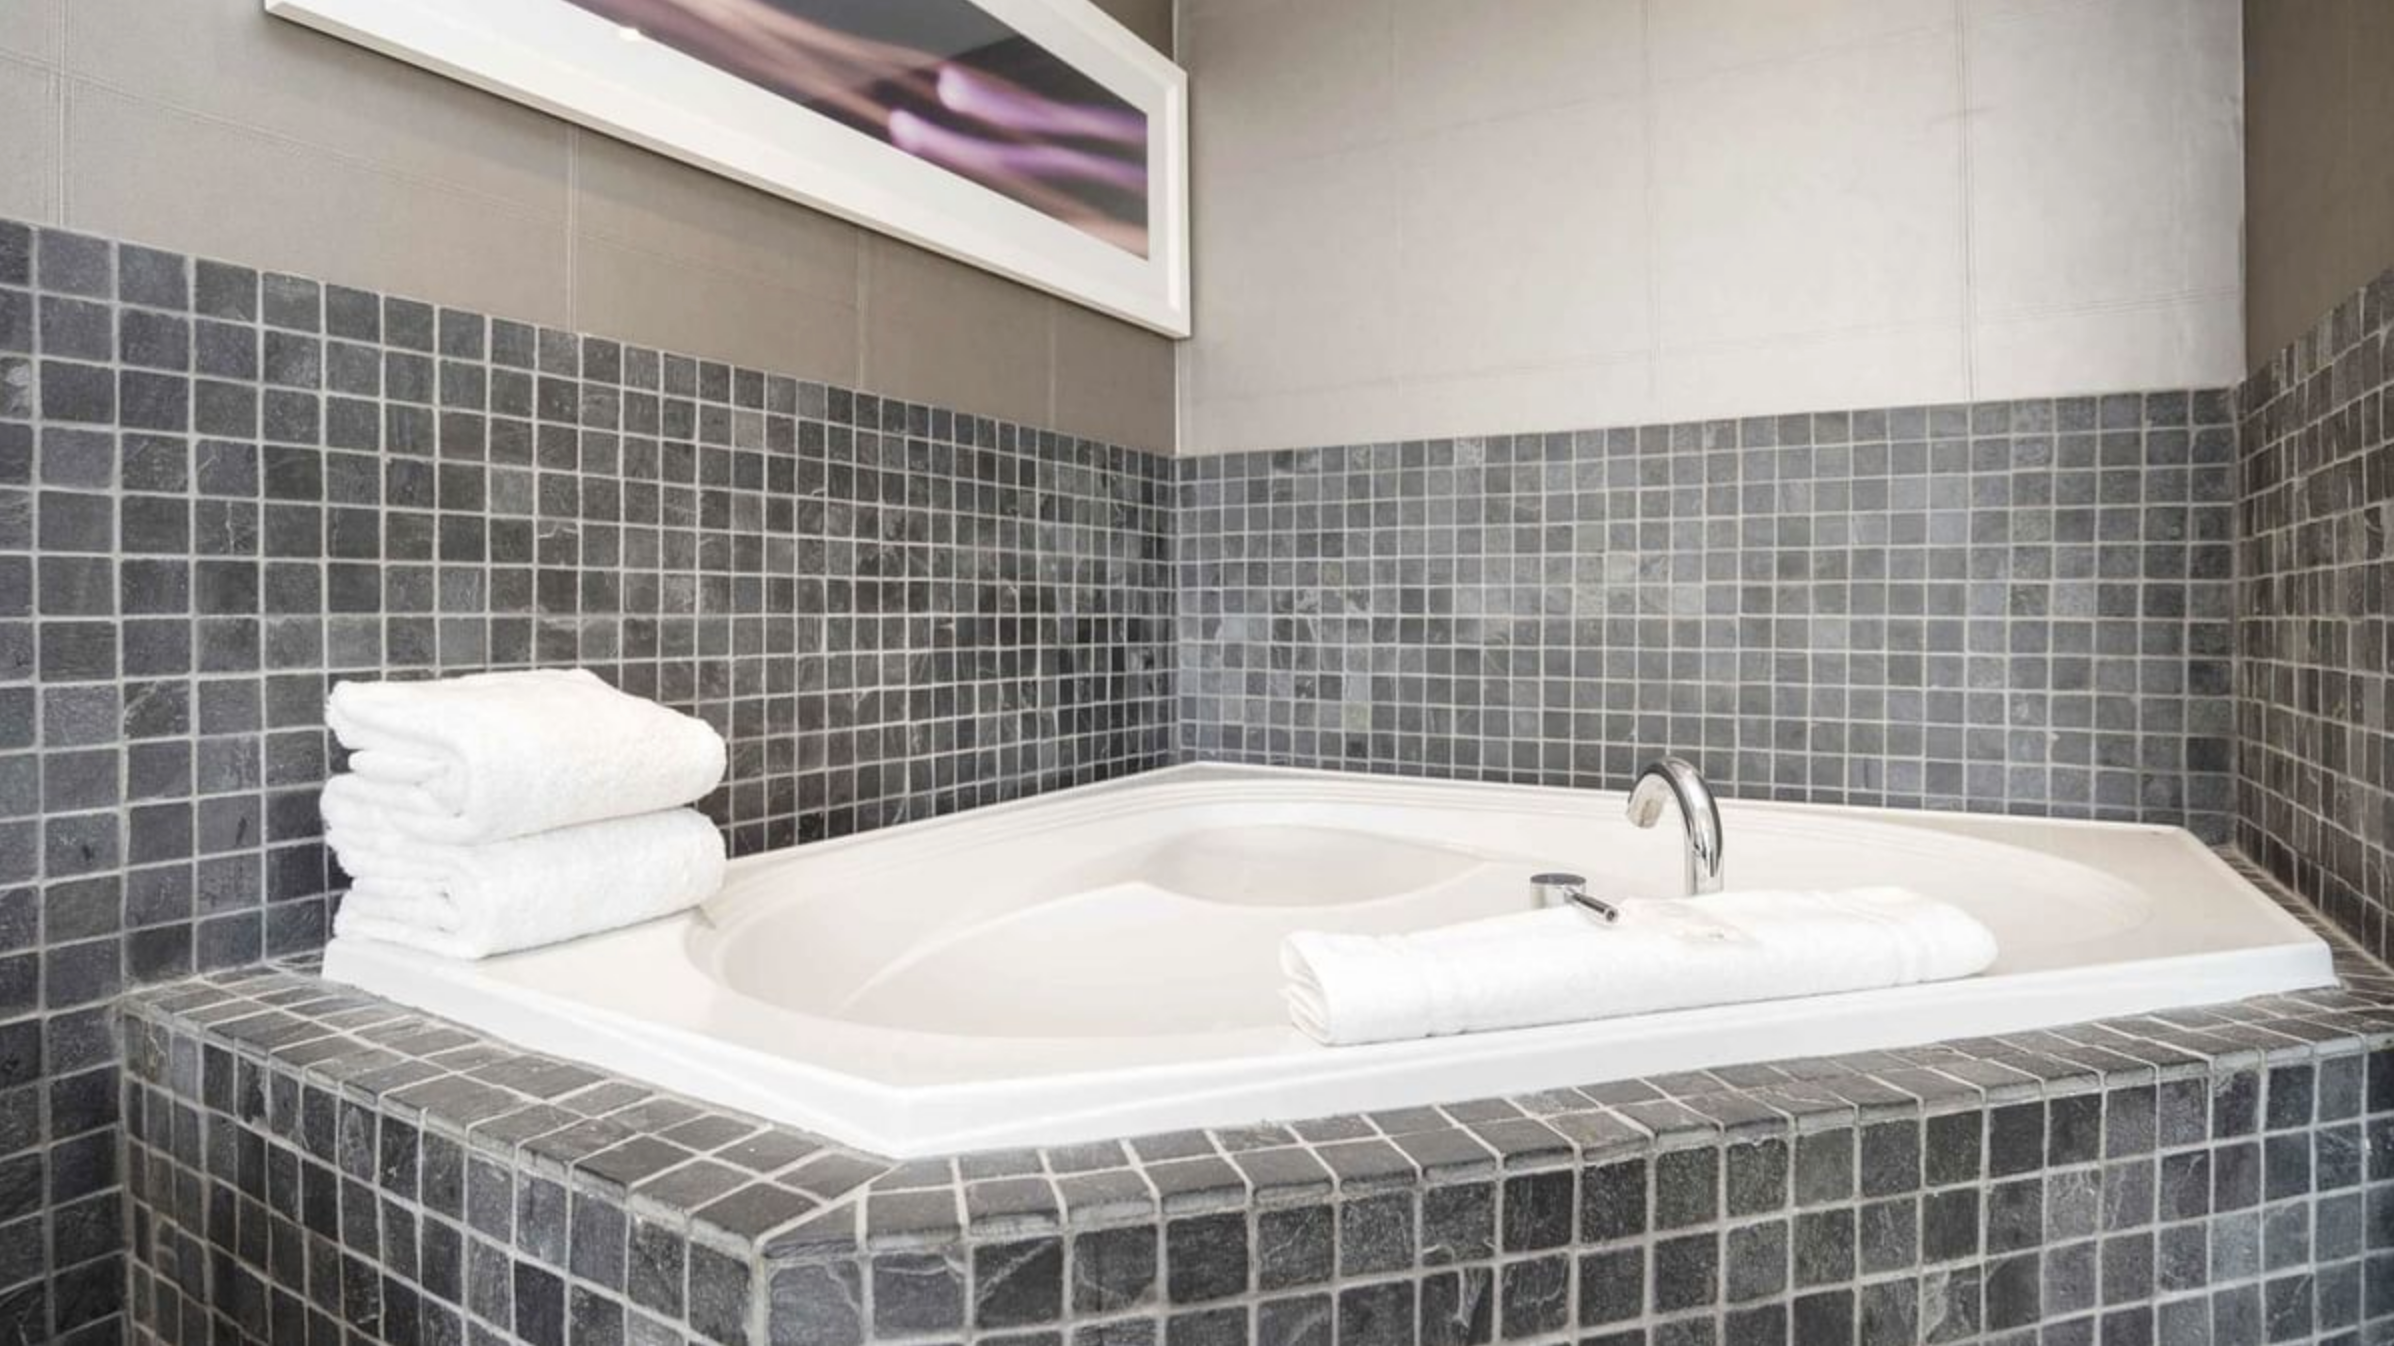 8. Sandman Signature Toronto Airport Hotel - Signature Penthouse Jacuzzi King Suite with Sofa Bed, Kitchen